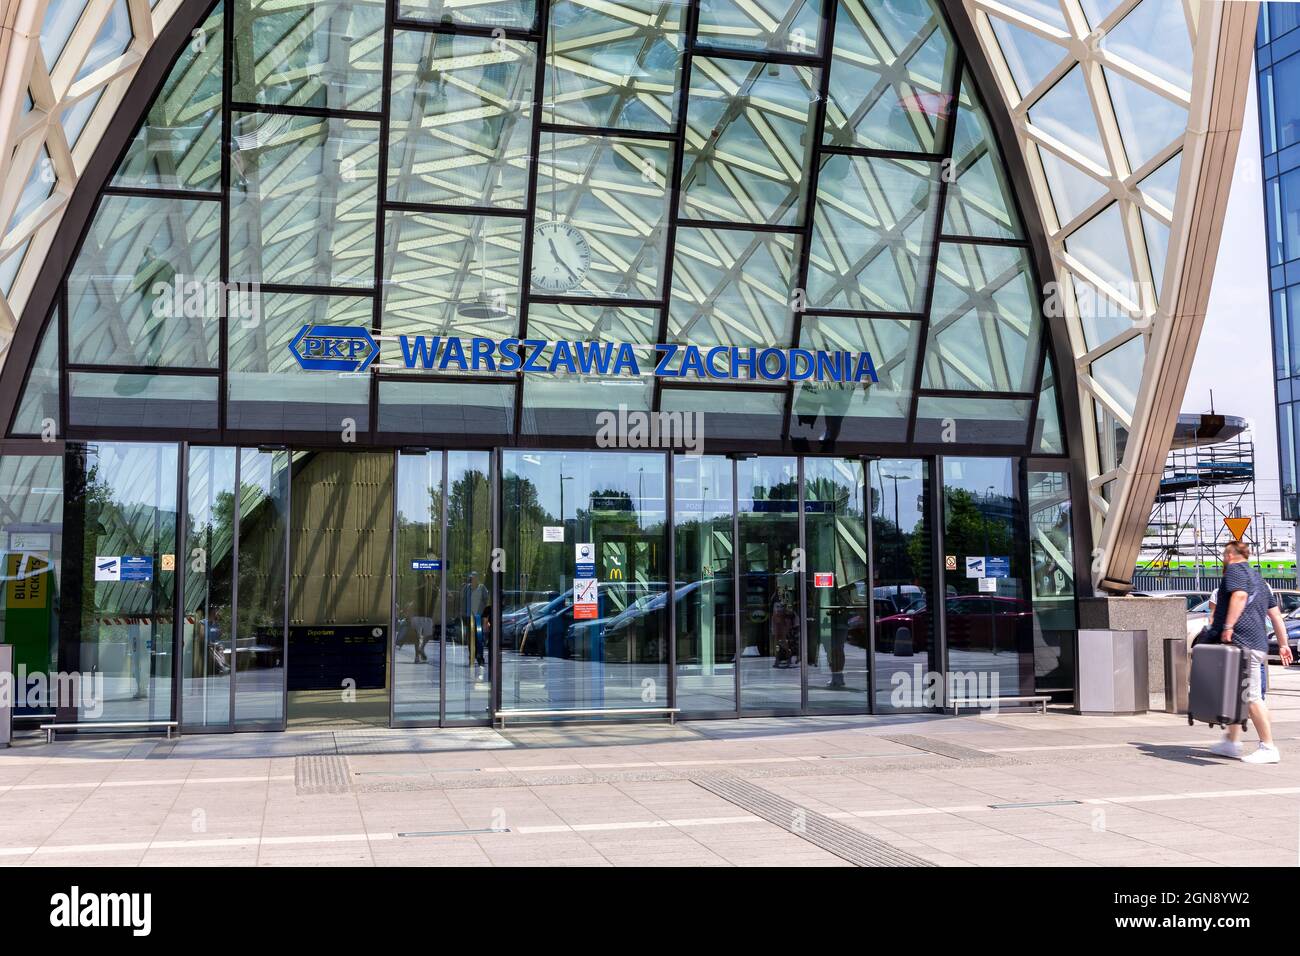 Warsaw, Poland, 09.07.2021. PKP Warszawa Zachodnia, Warsaw West train and bus station new modern glass building with passengers entering the station. Stock Photo